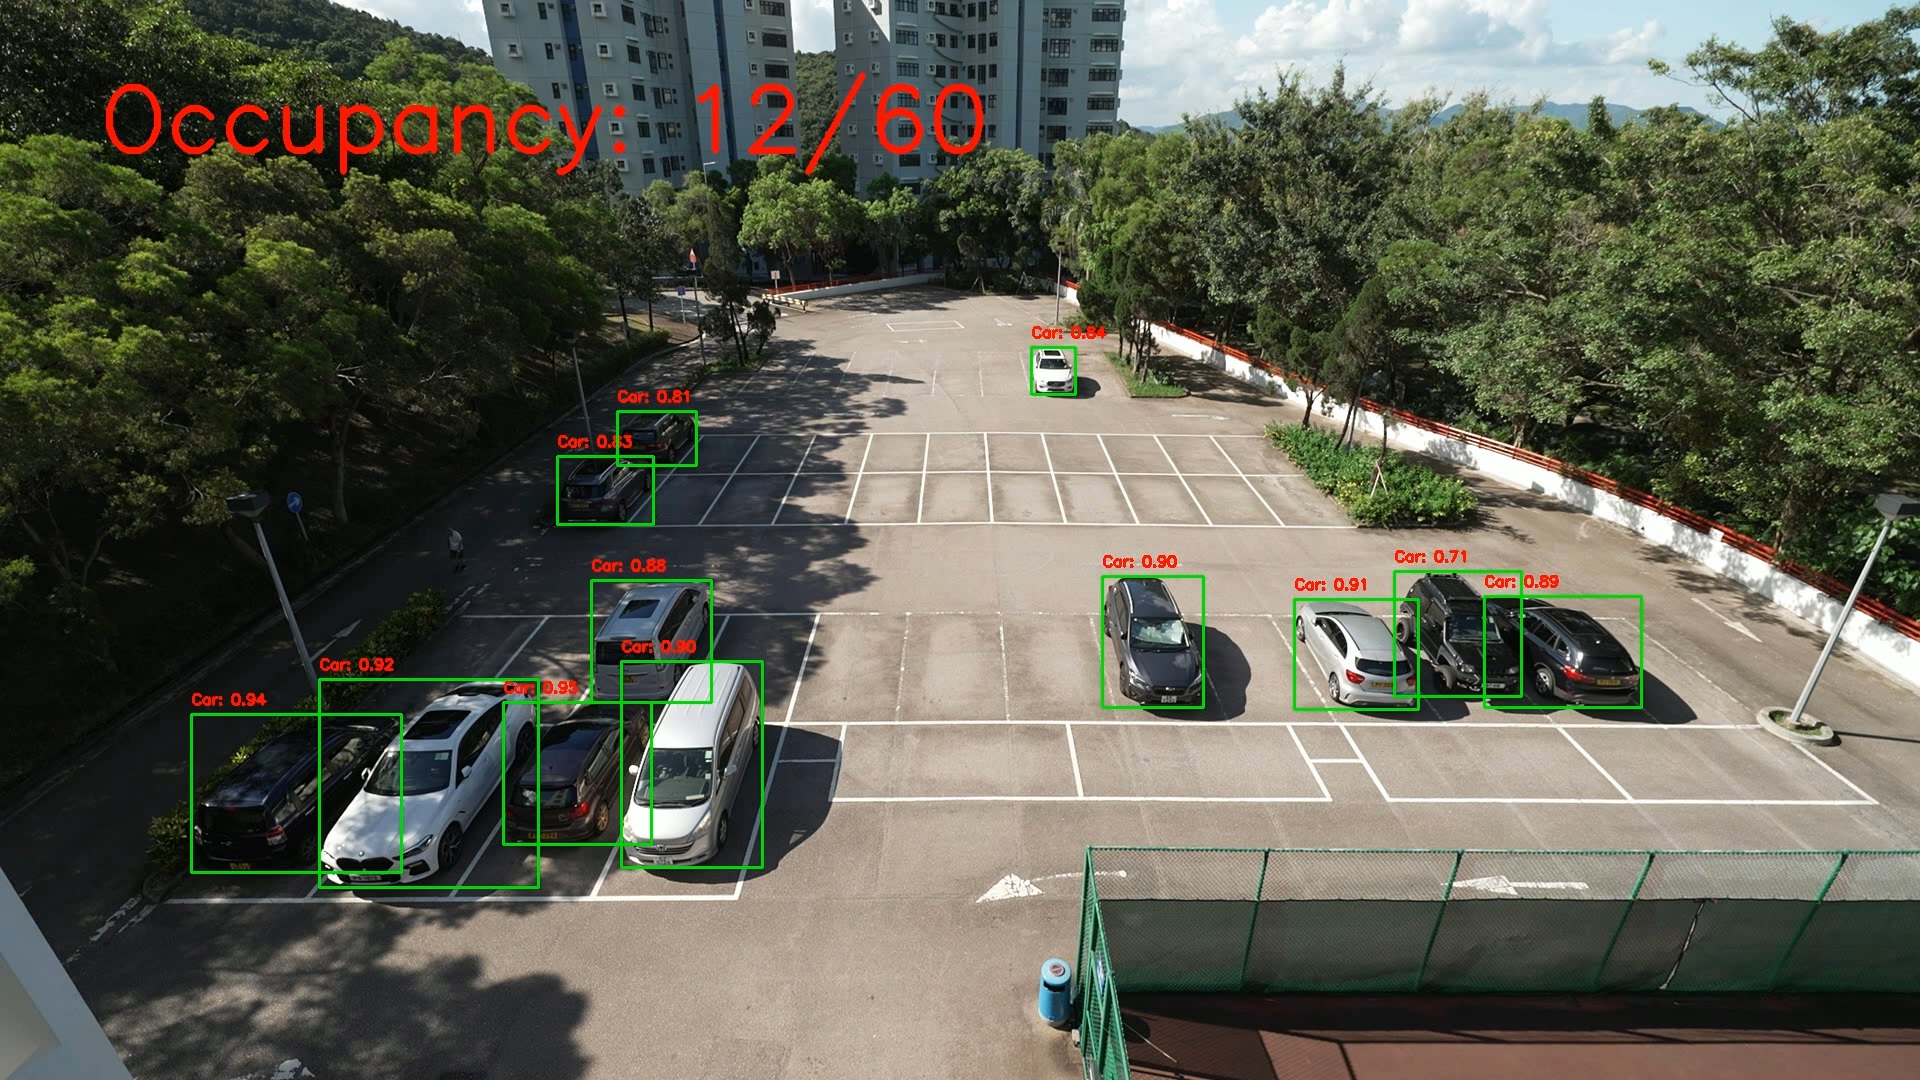 The “Sustainable Smart Campus as a Living Lab” project, led by Prof. Gary CHAN of HKUST’s Department of Computer Science and Engineering, will introduce a smart parking management system powered by Edge AI Camera technology to enable license plate recognition and vacancy detection, in which a patent-pending camera can recognize more than 10 license plates and detect more than 30 vacancies simultaneously.